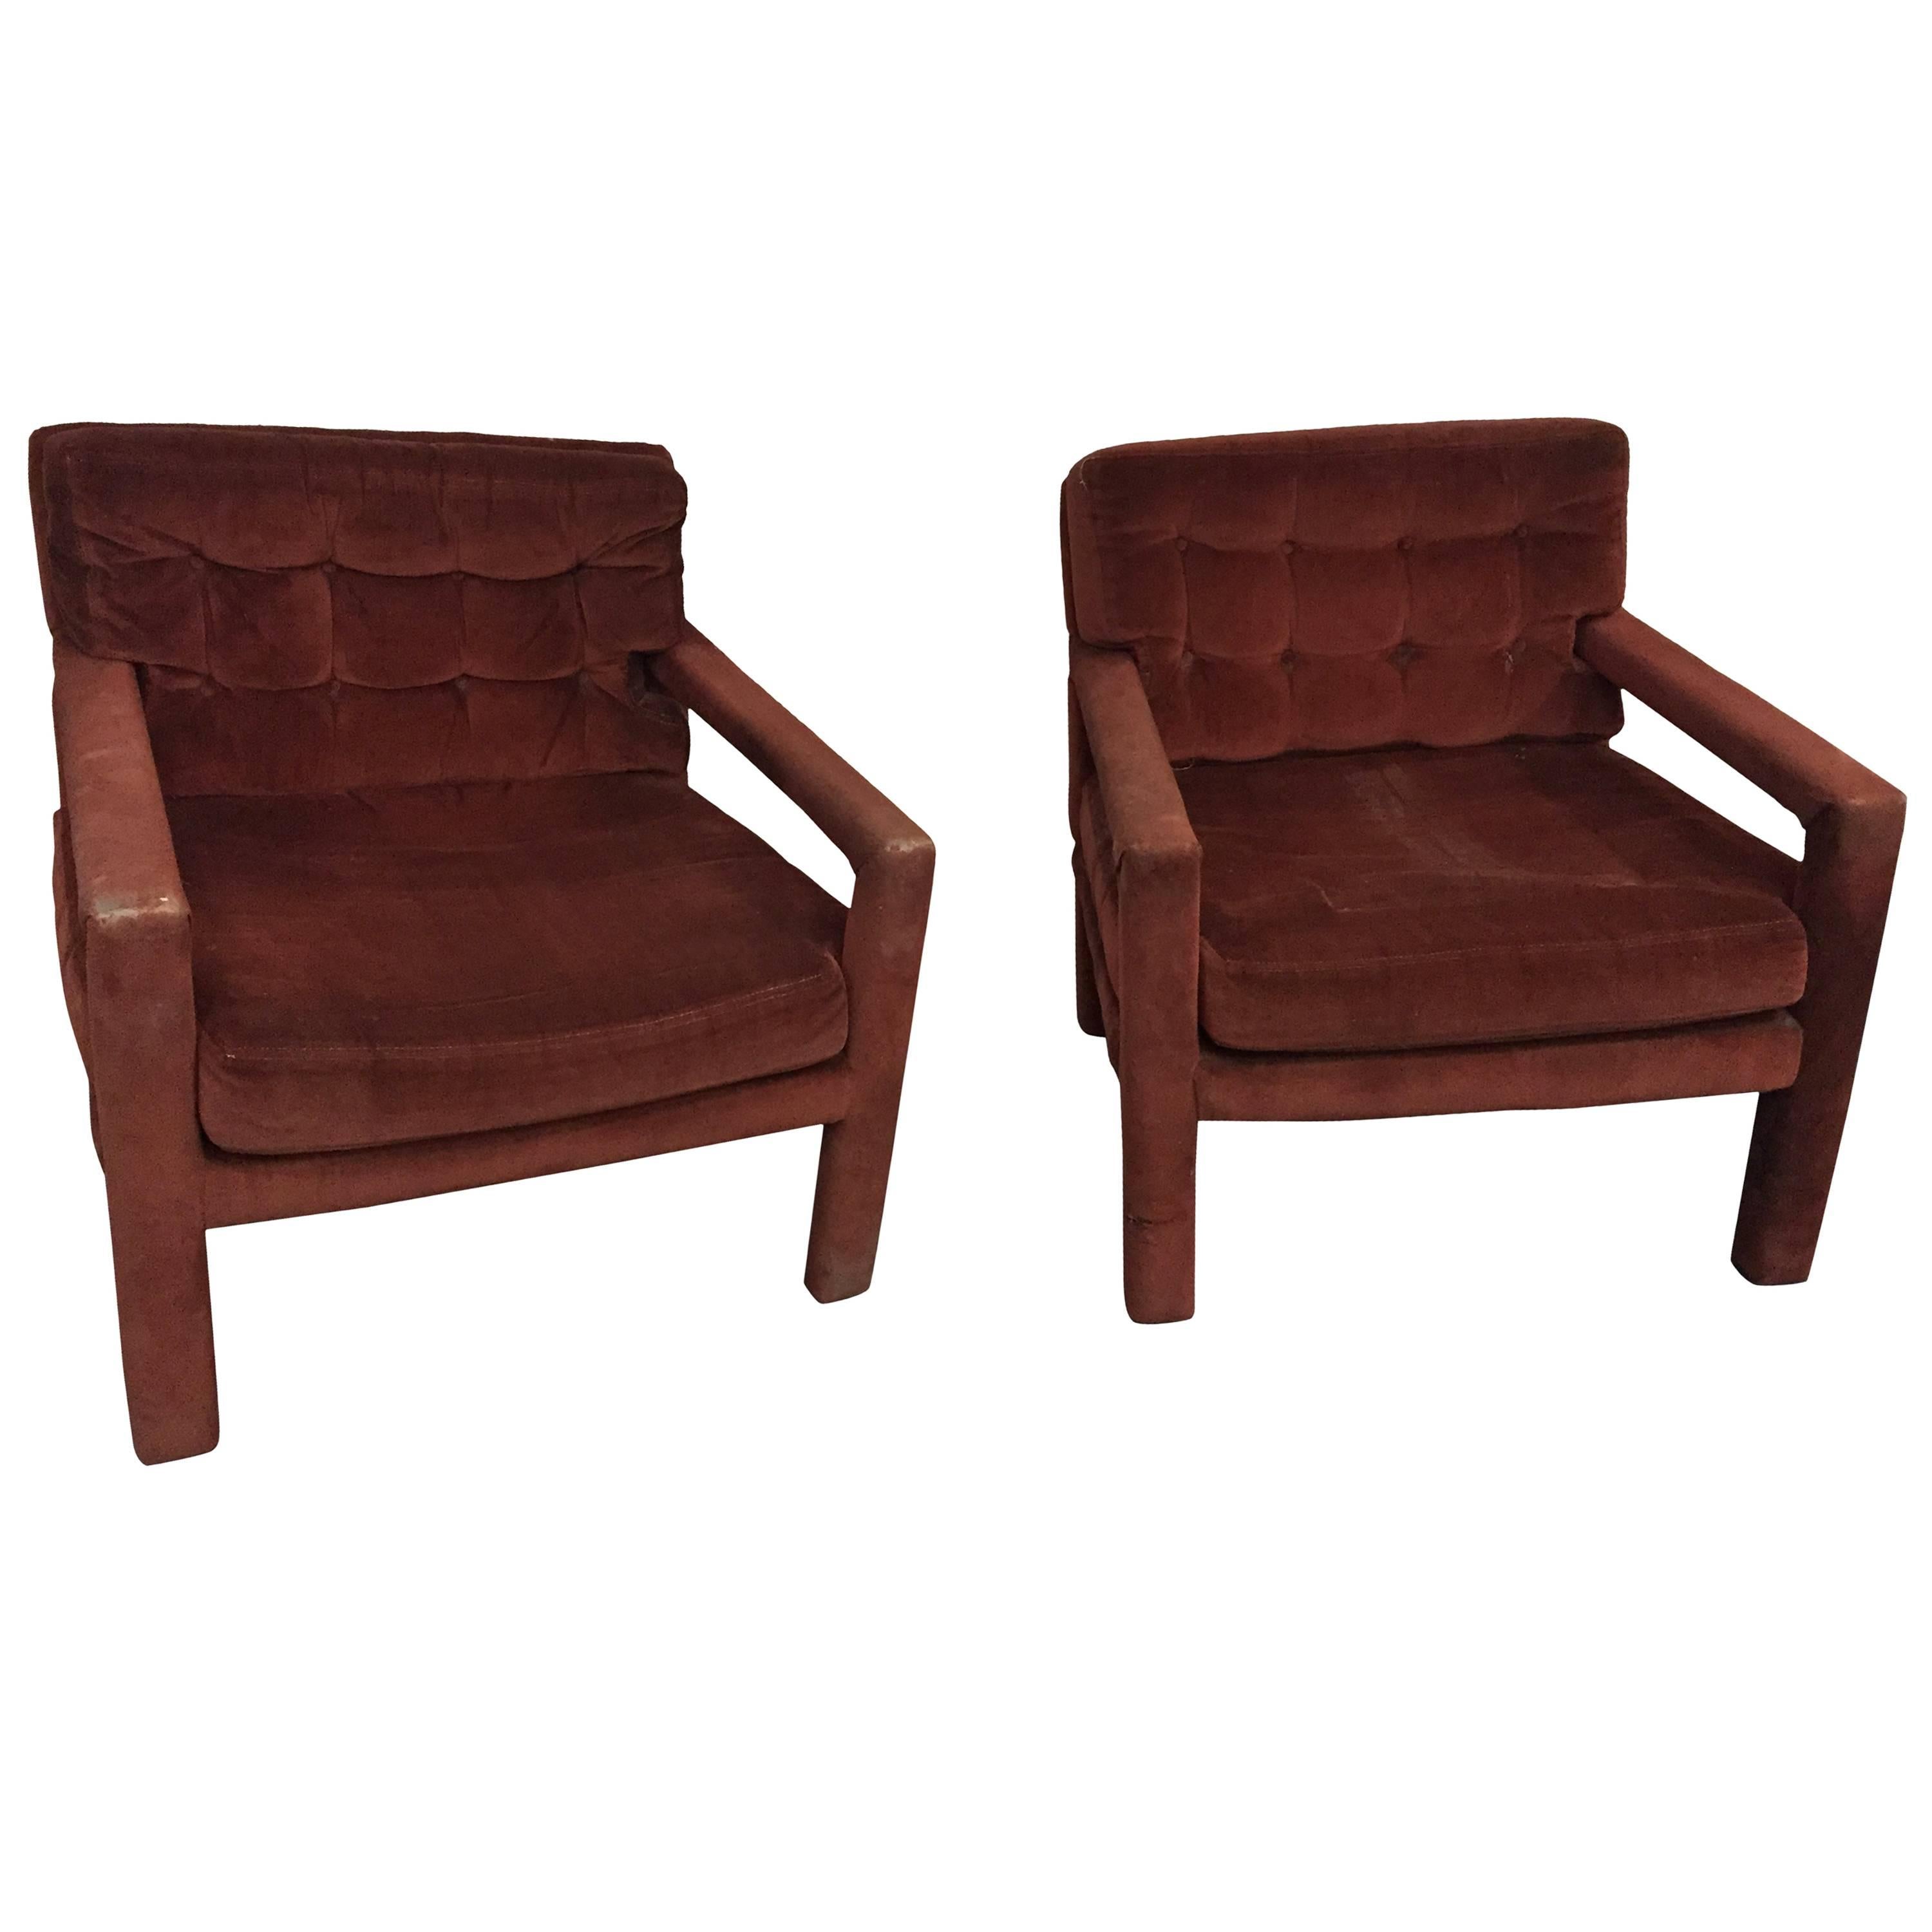 Pair of Milo Baughman Chocolate Color Button Tufted Lounge Chair or Armchairs For Sale